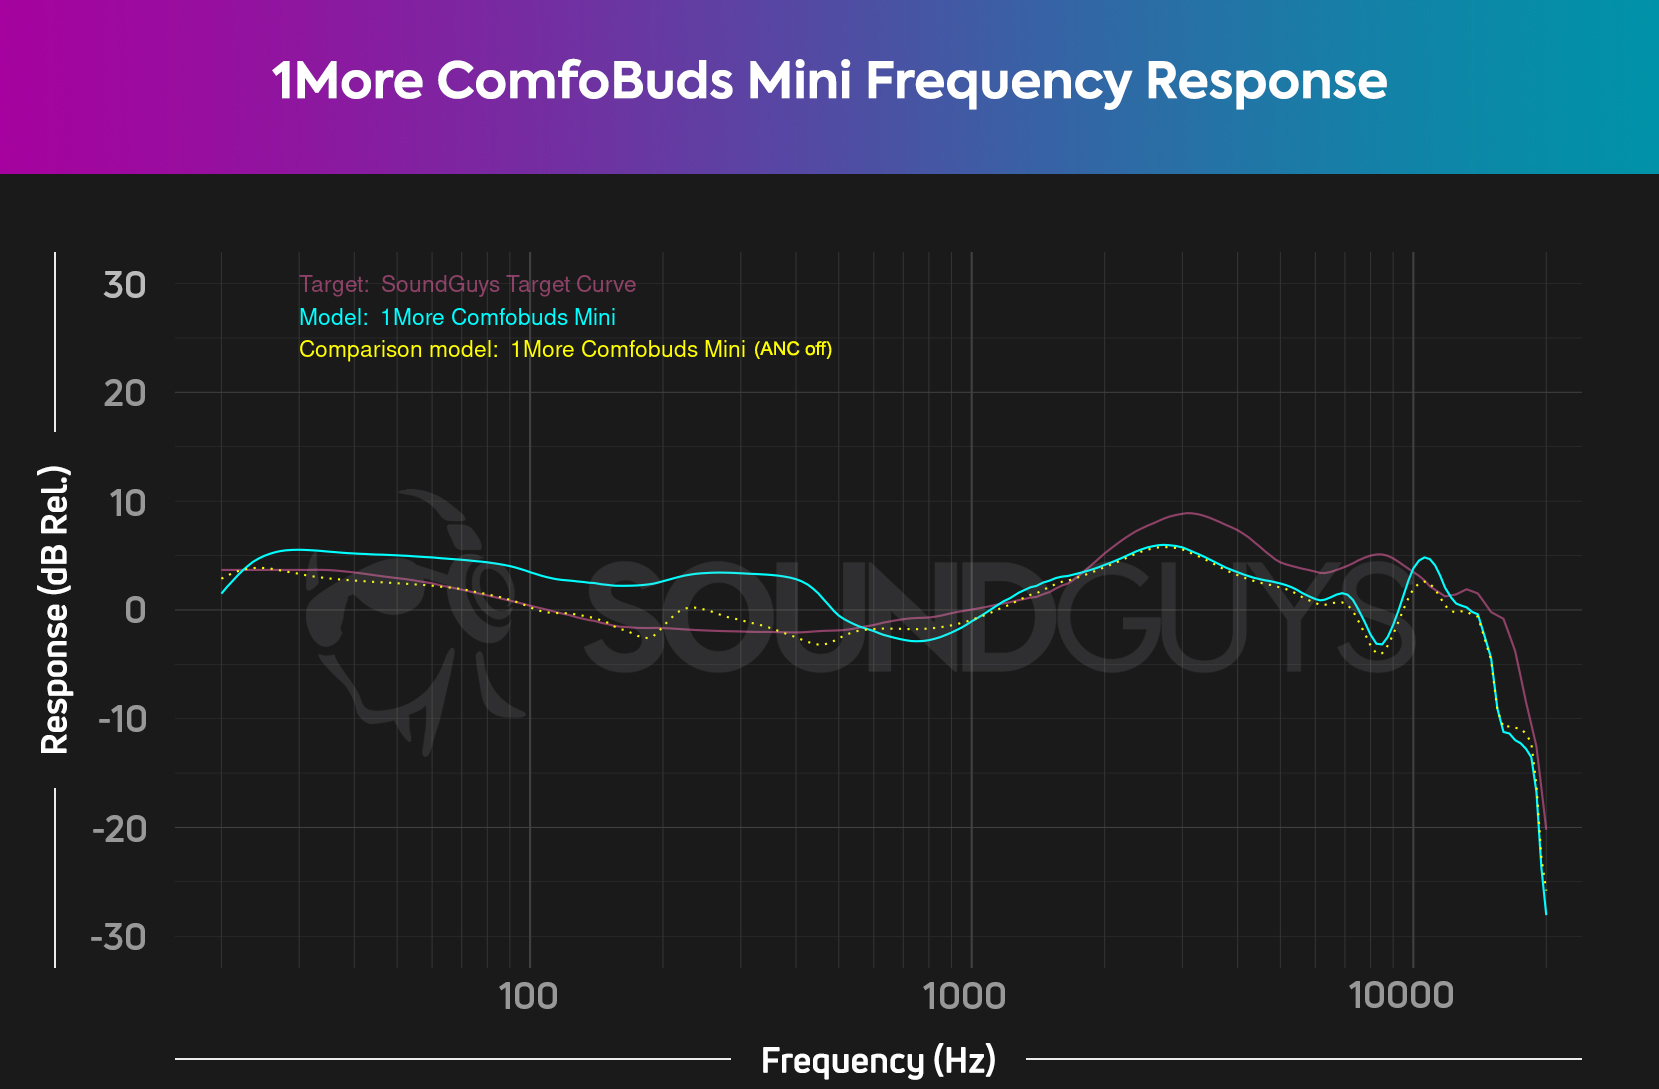 A frequency response chart that compares the 1More ComfoBuds Mini against the SoundGuys curve, which also shows how it changes with ANC on and off.